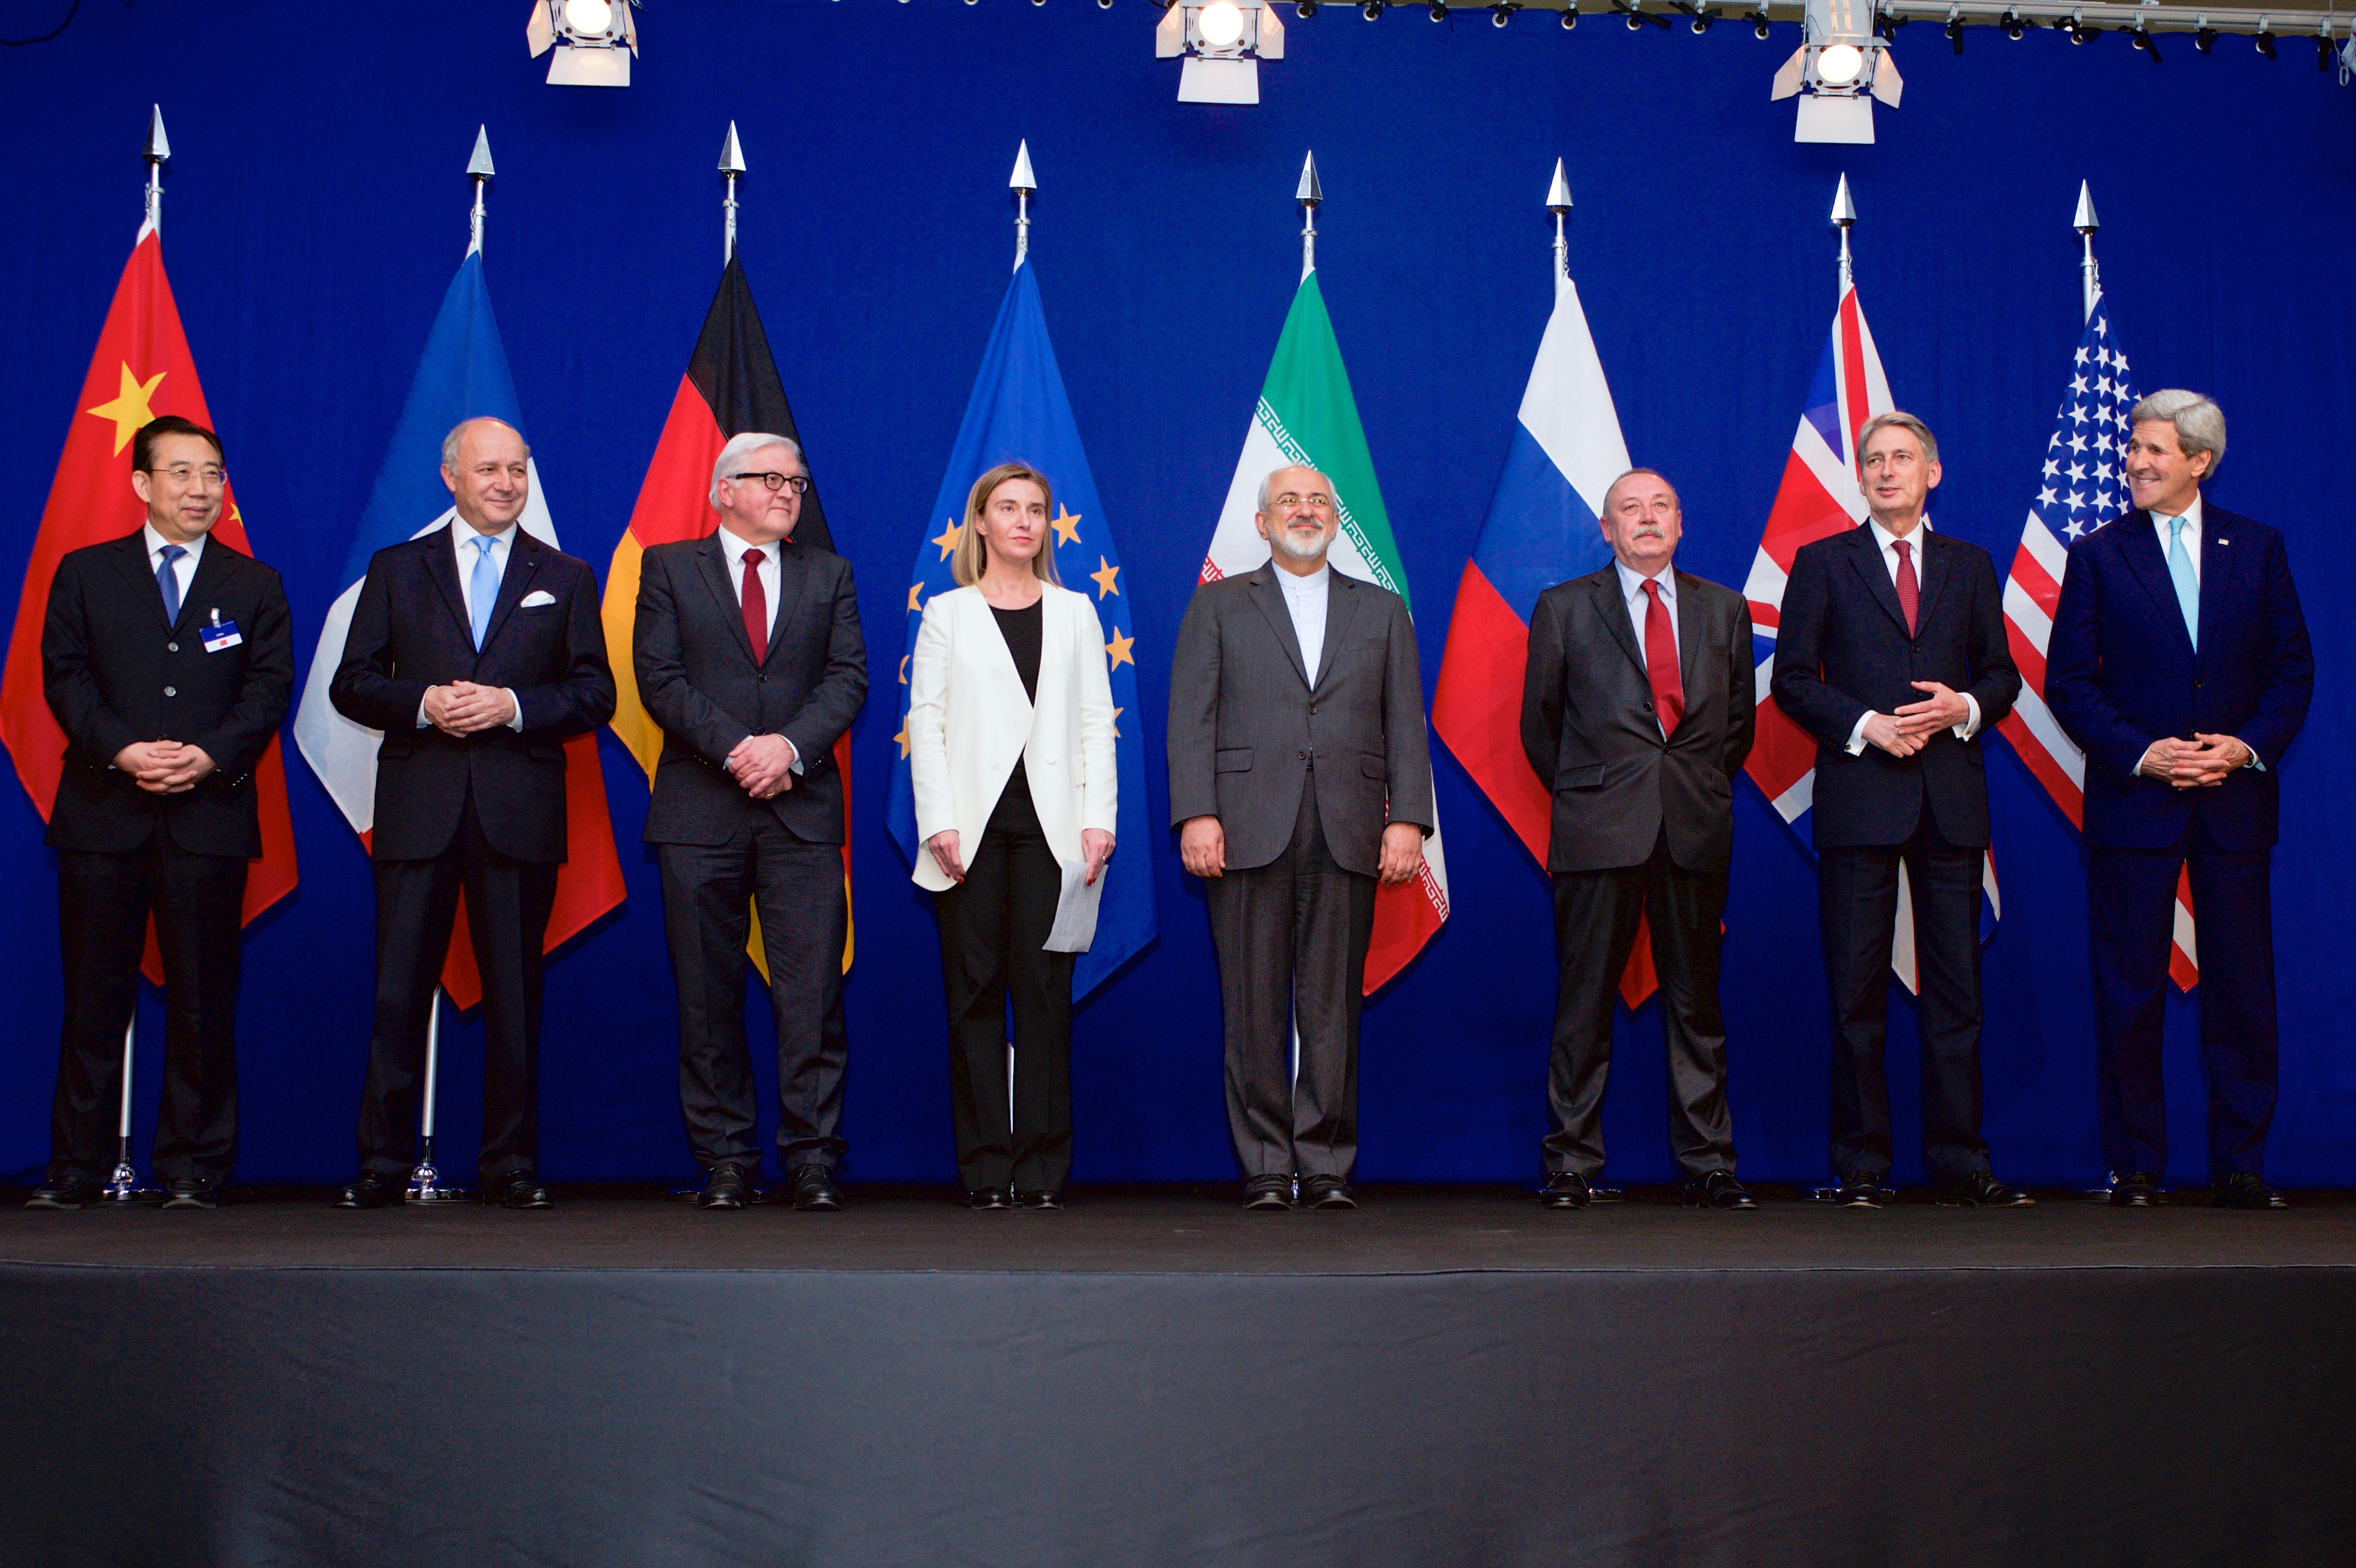 The ministers of foreign affairs and other officials from the P5+1 countries, the European Union and Iran while announcing the framework of the Joint Comprehensive Plan of Action on the Iranian nuclear program. 